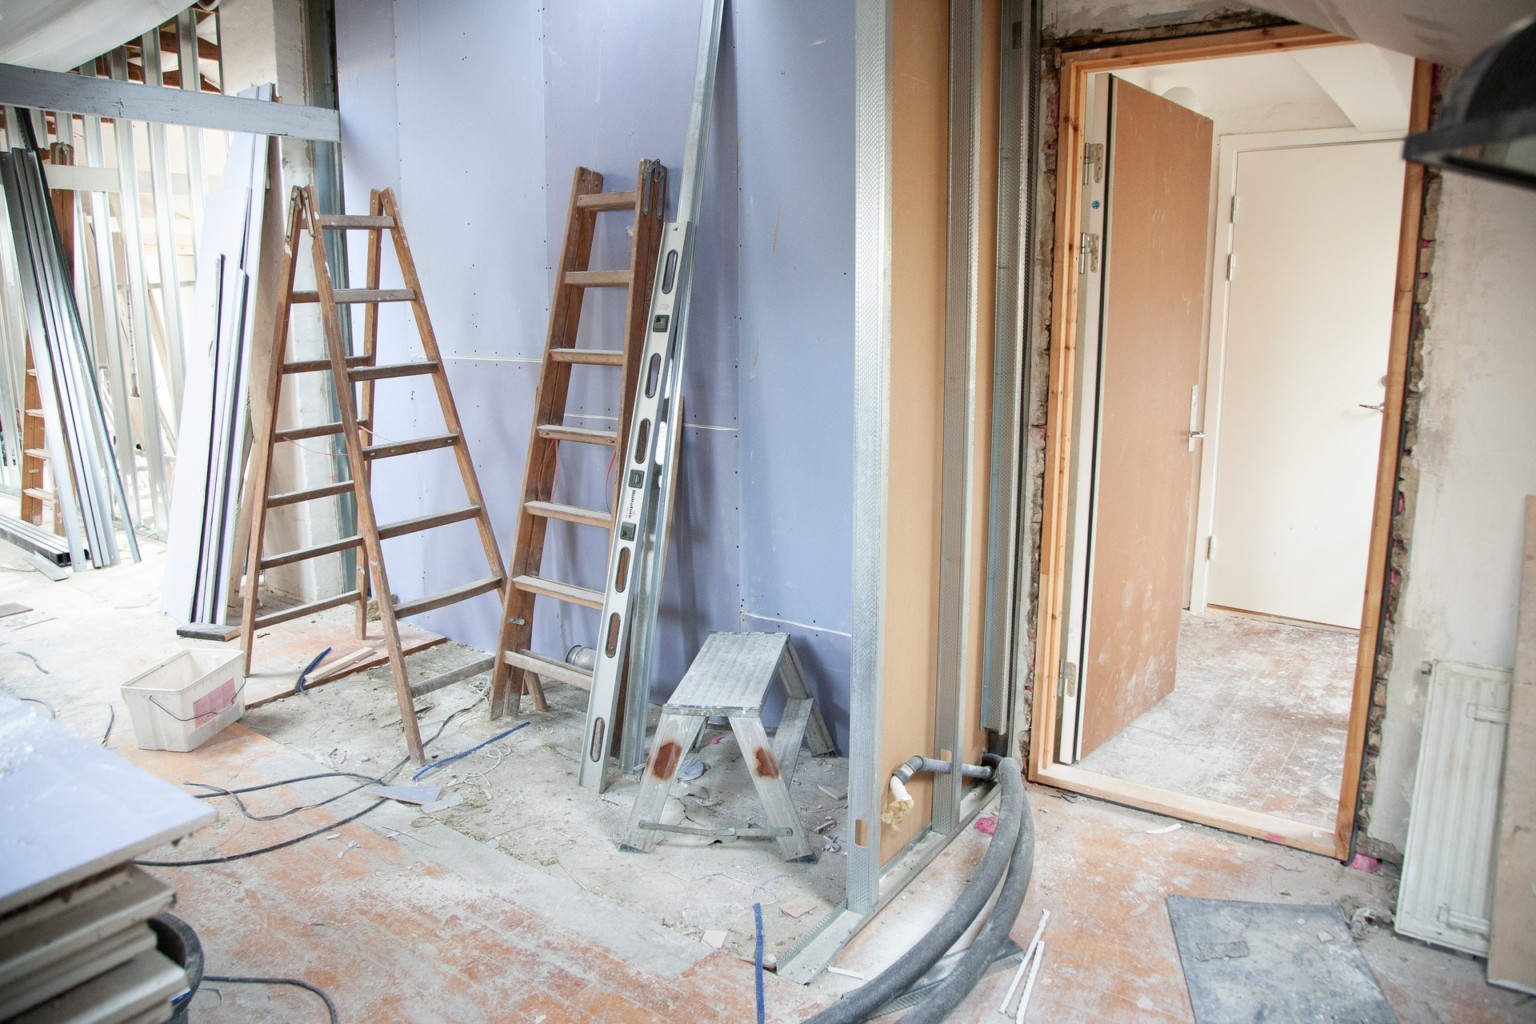 What to Expect During Home Renovations and Remodeling Projects